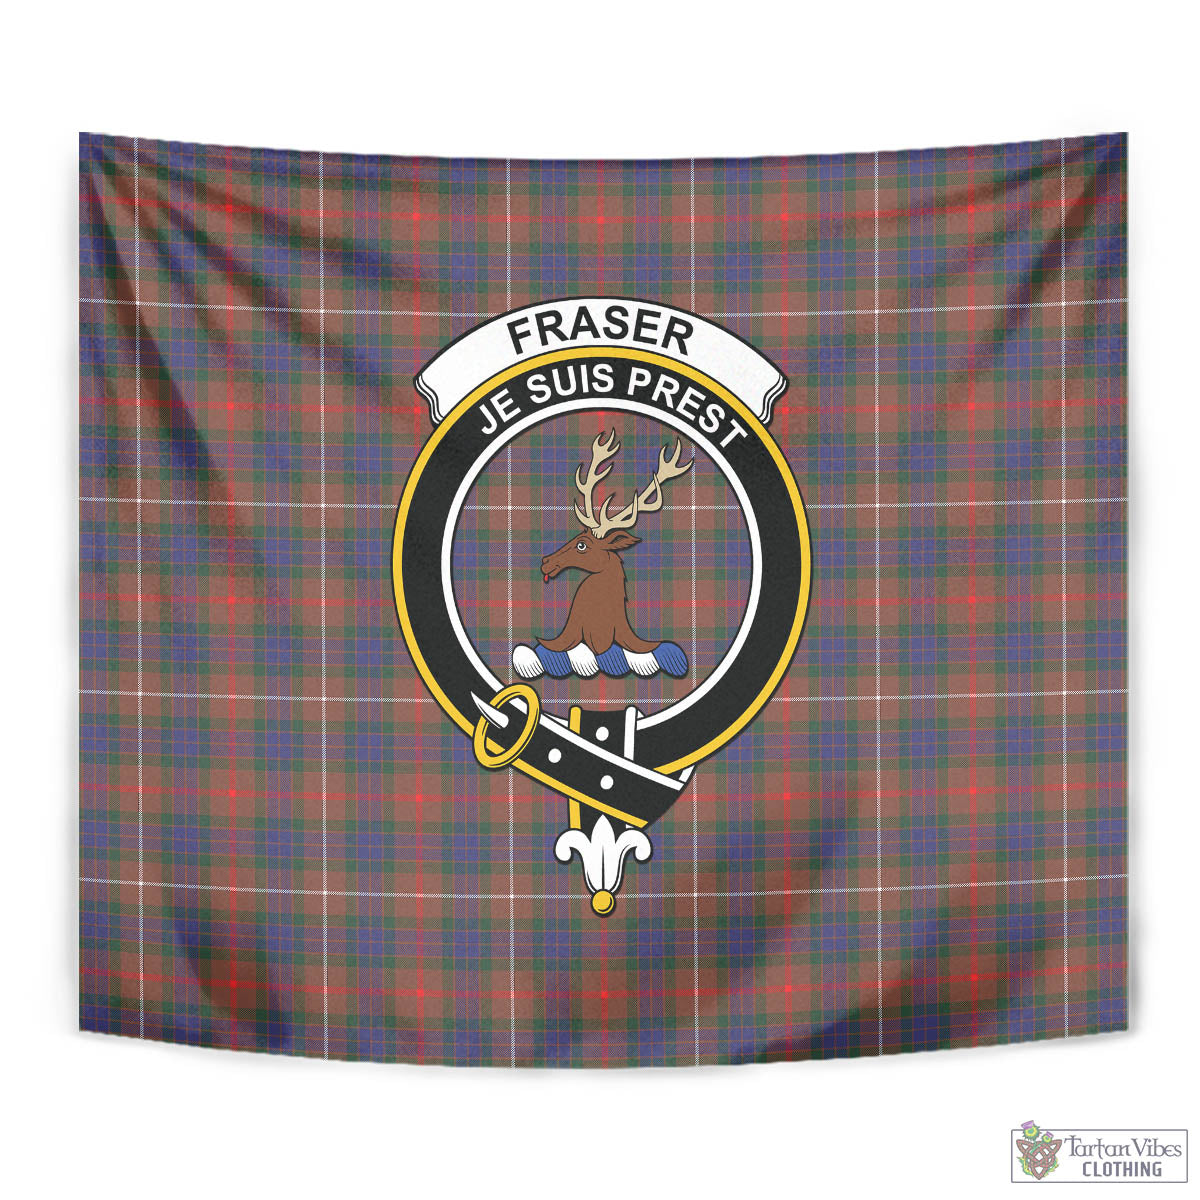 Tartan Vibes Clothing Fraser Hunting Modern Tartan Tapestry Wall Hanging and Home Decor for Room with Family Crest